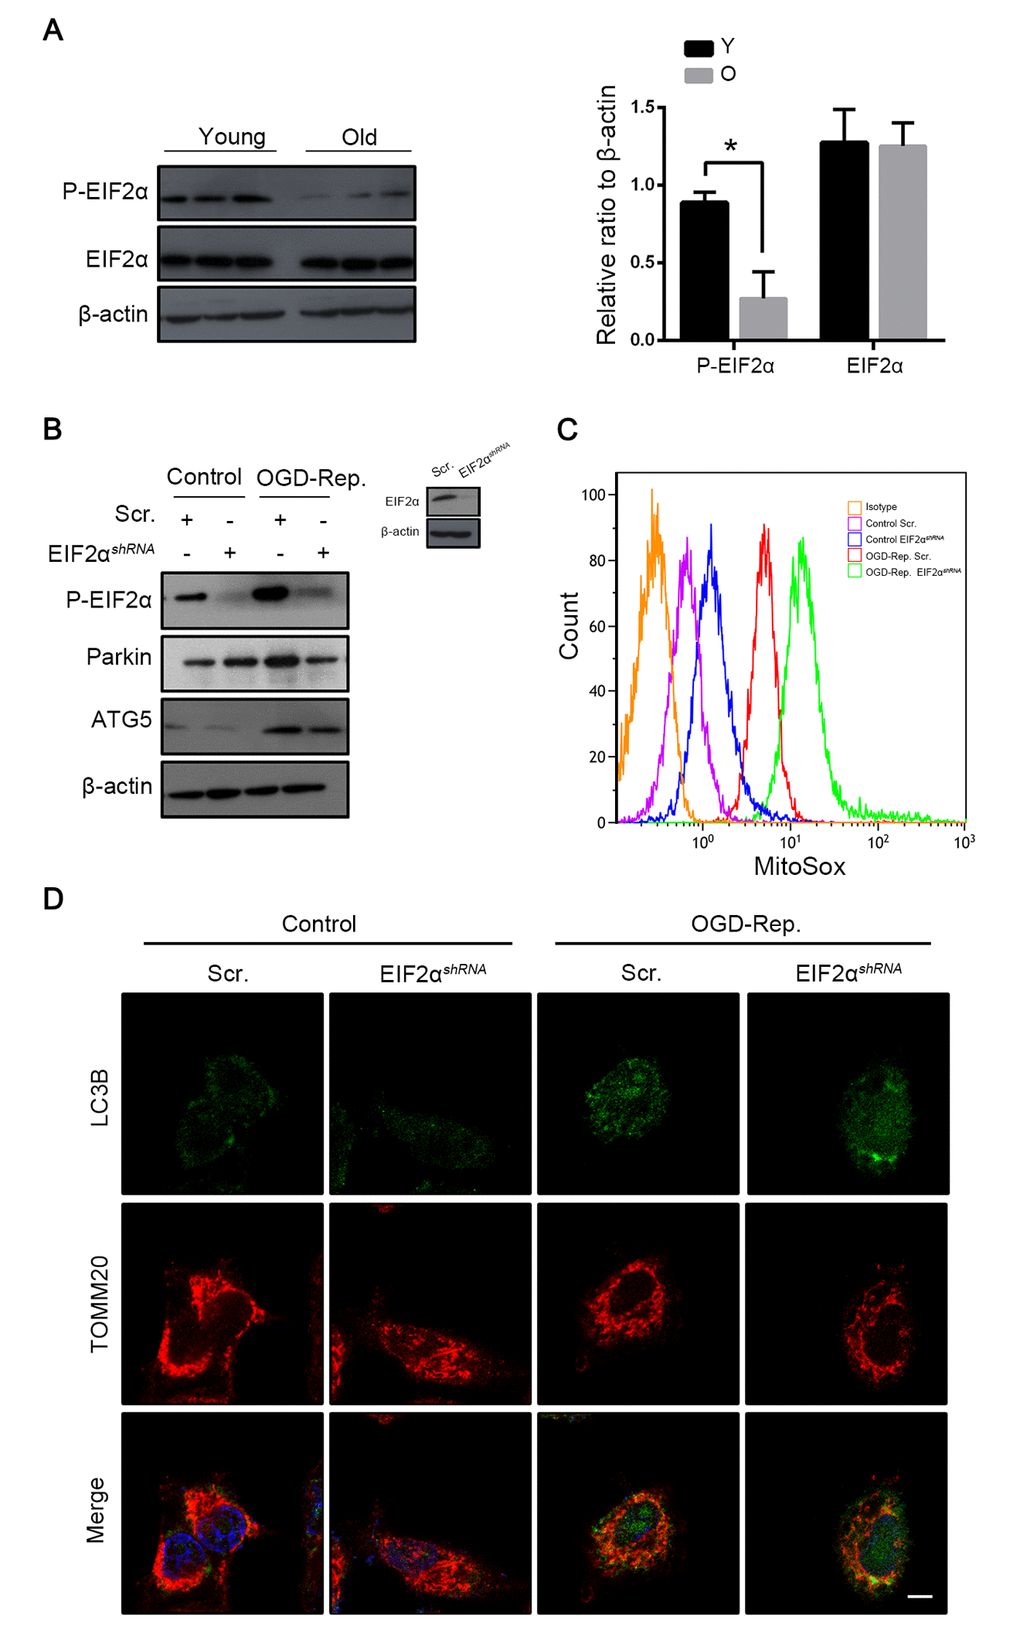 Phosphorylation of EIF2α induced mitophagy in L02 cells after OGD-Rep. with increased parkin expression. Mice of different age were treated as indicated (Y for young mice, O for old mice). (A) The EIF2α and phosphorylated EIF2α protein levels were determined by western blot analysis from the indicated groups. L02 cells were transfected with EIF2α shRNA (EIF2αshRNA) or control shRNA (Scr.). Transfected L02 cells were subjected to OGD for 24 h, followed by recovery in normal cell culture medium and oxygen for 2 h. (B) The whole cells lysate was collected and phosphorylated EIF2α, Parkin and Atg5 protein levels were determined by western blot analysis. (C) Mitochondria reactive oxygen species generation by was detected by MitoSOXred flow cytometry. (D) LC3B (green) and the mitochondrial marker TOMM20 (red) were stained by immunofluorescence. and the images were taken by confocal microscopy after 2 h of reperfusion. The data are expressed as mean ± SD. Statistical comparisons were performed with t-test. *P 